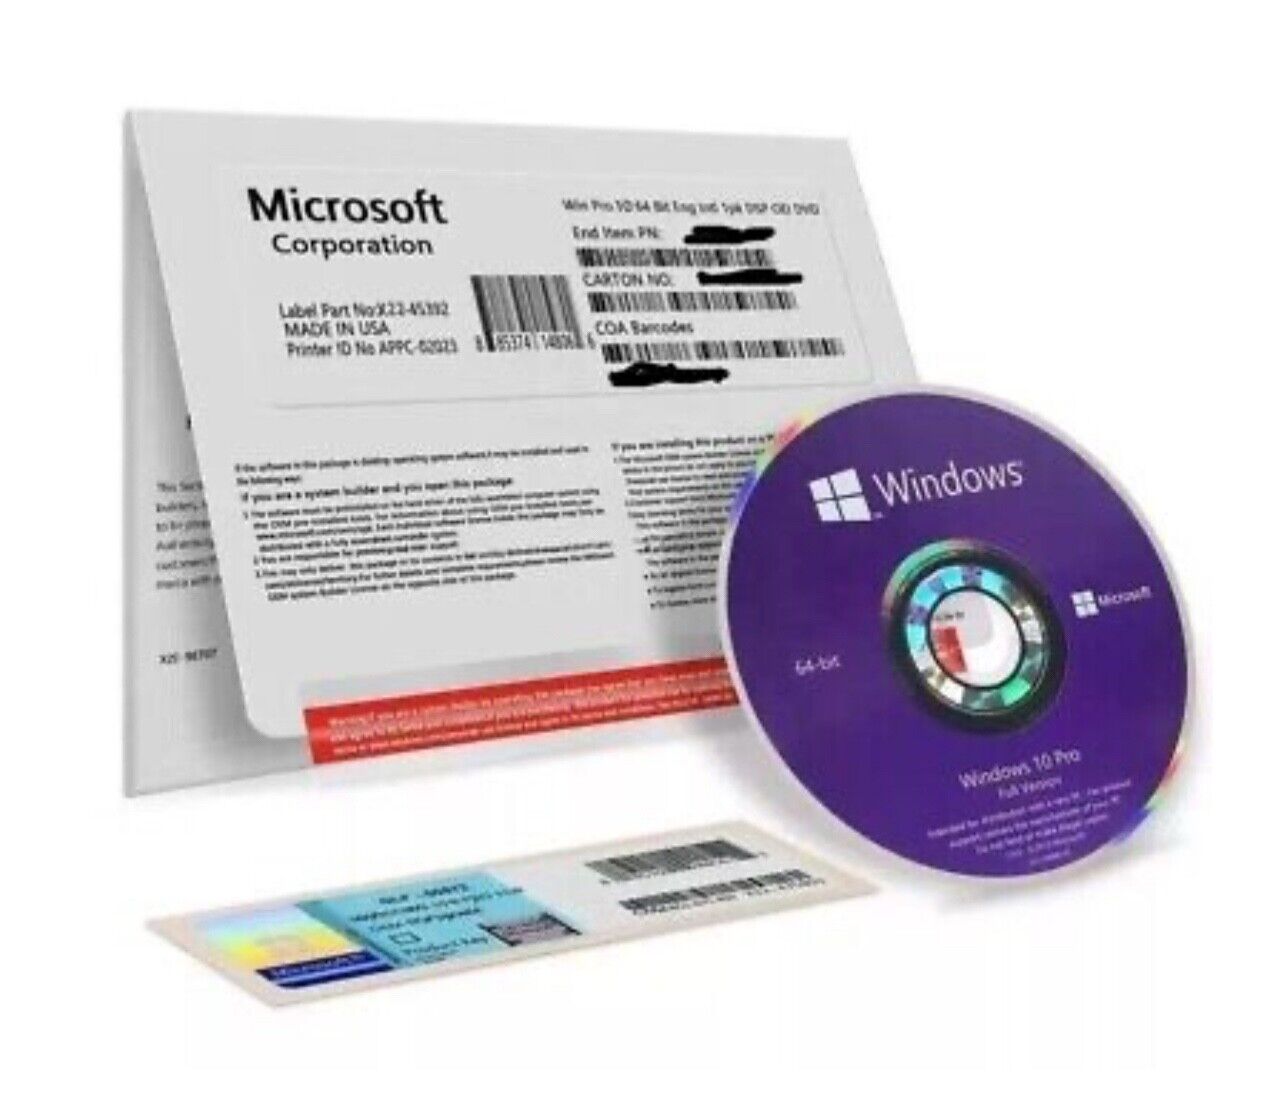 NEW MS Win 10 pro 64 Bit, With DVD Installer, Product Key 